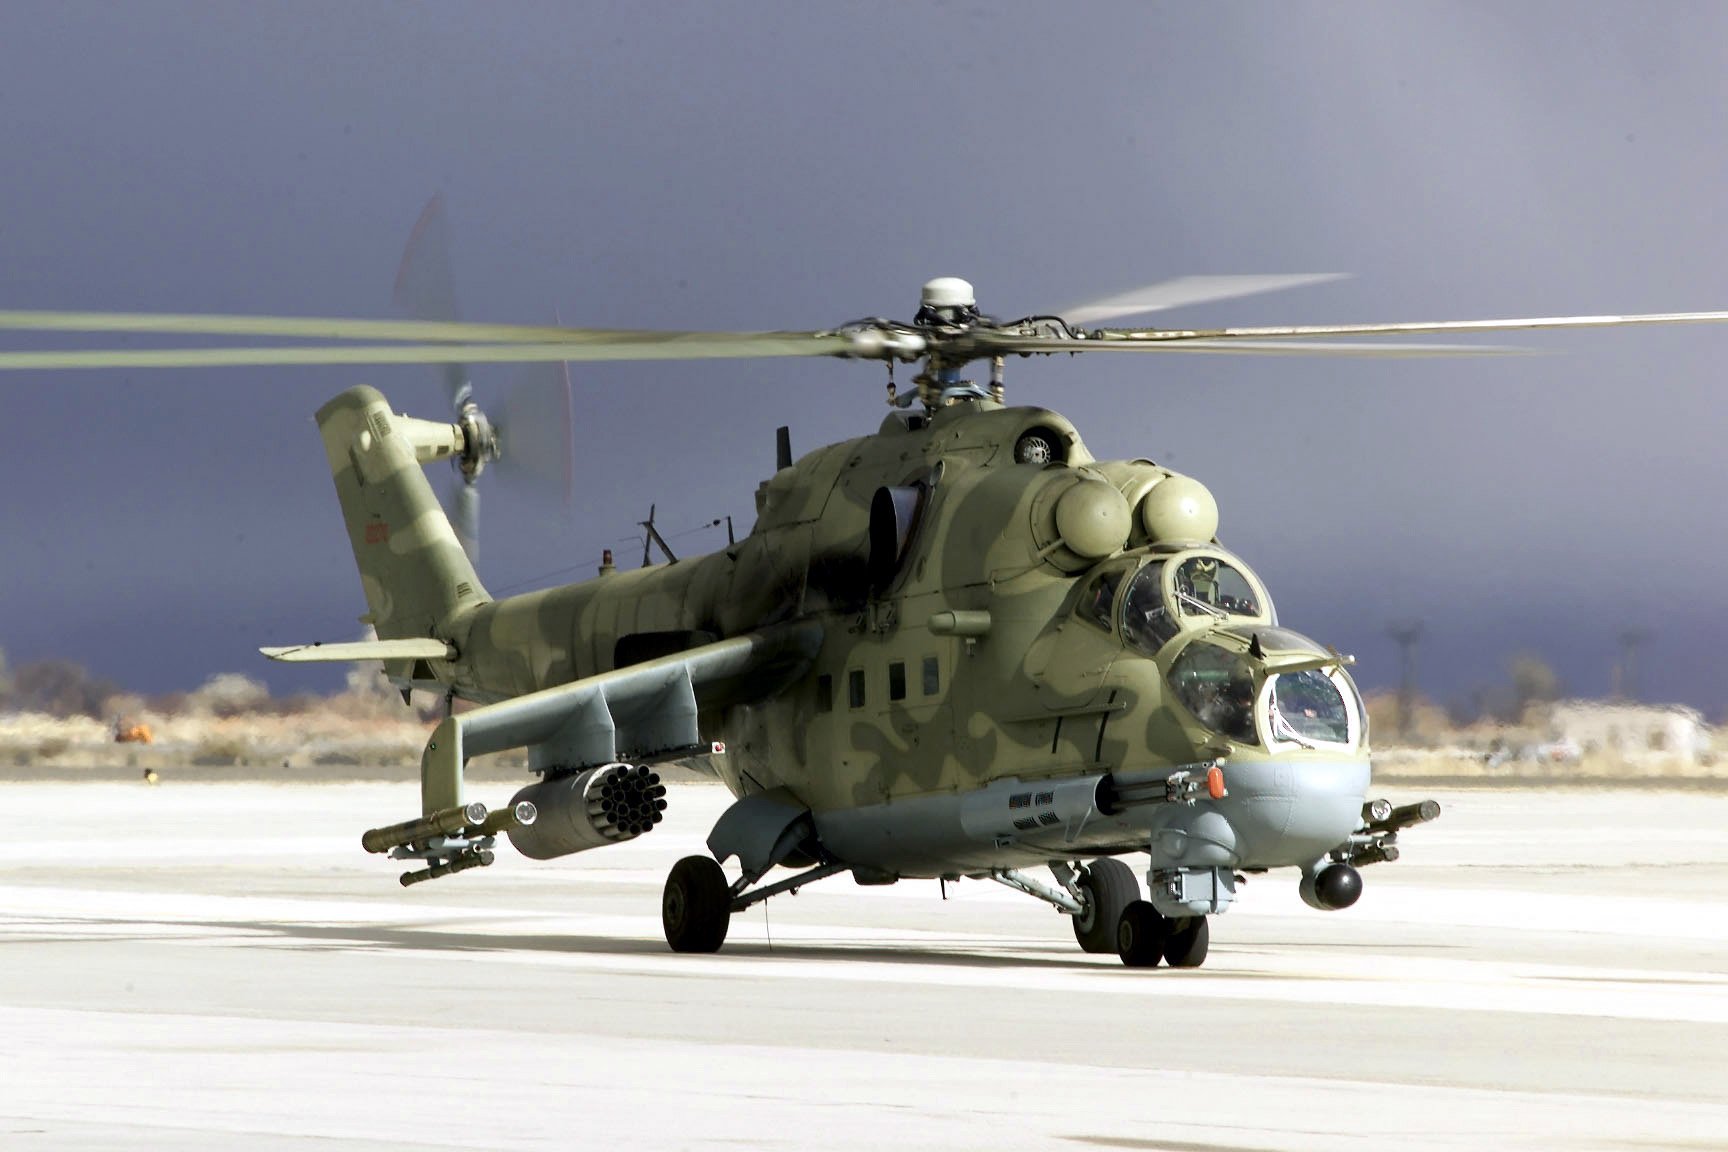 mi 24, Hind, Gunship, Russian, Russia, Military, Weapon, Helicopter, Aircraft,  22 Wallpaper